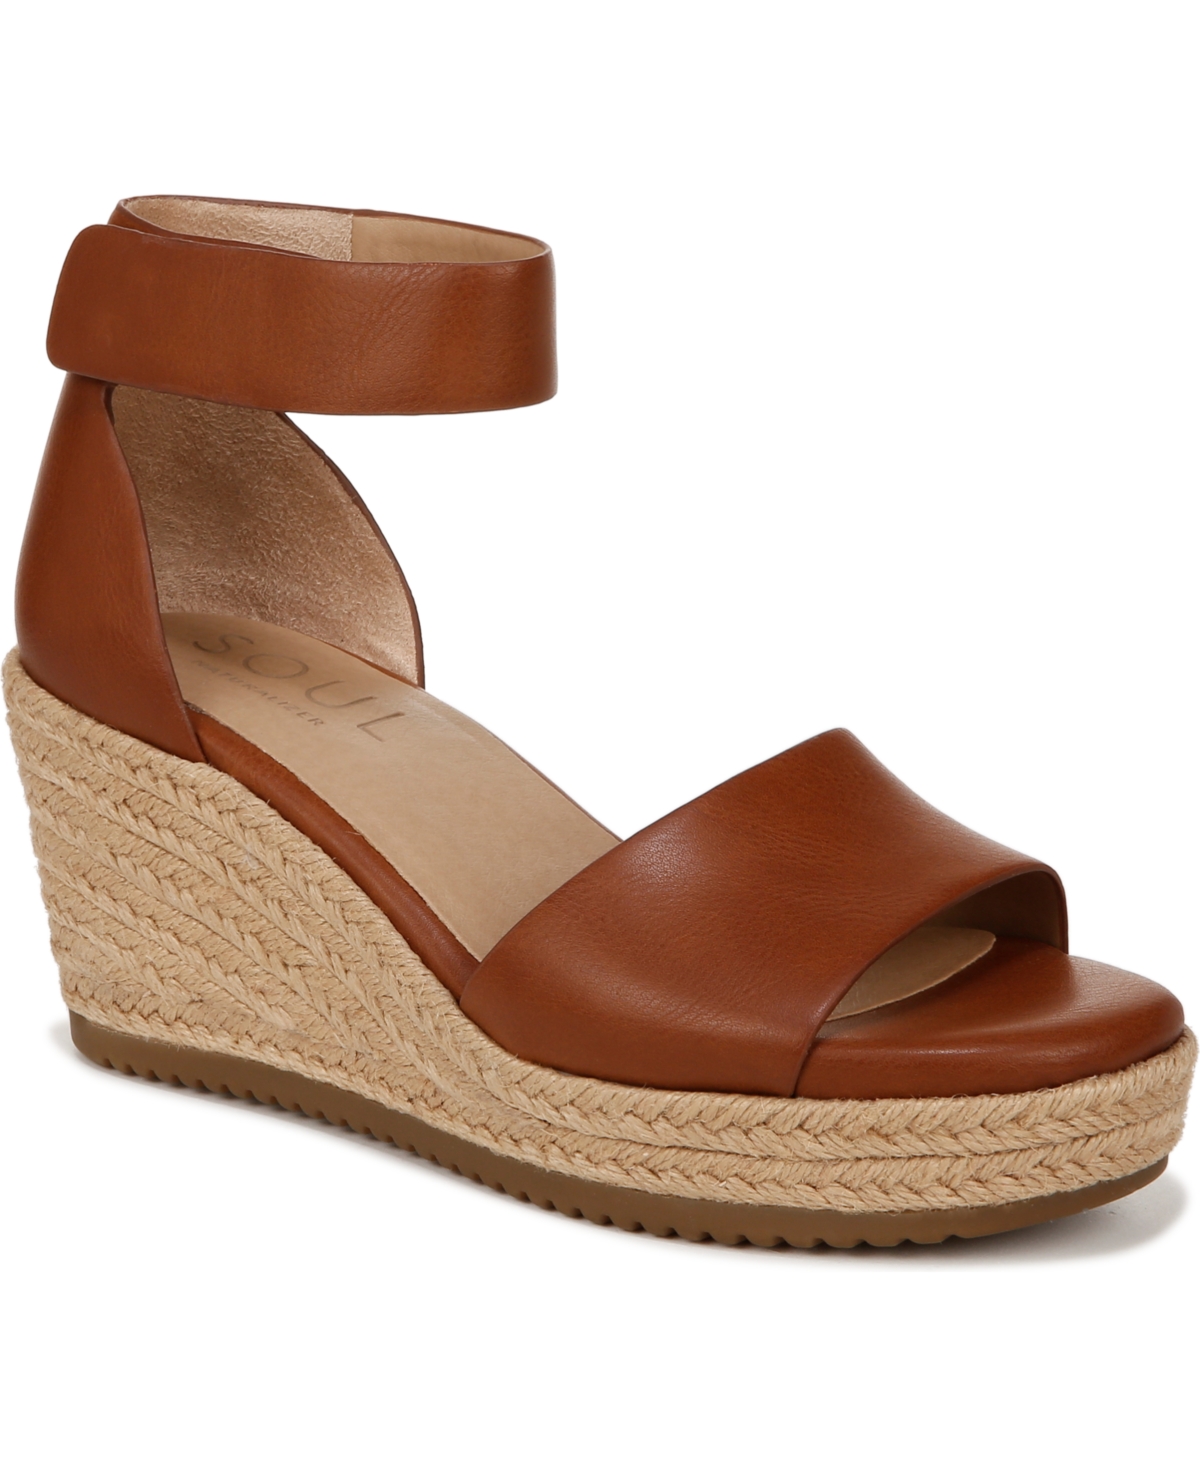 Oakley Ankle Strap Wedge Sandals - Mid Brown Faux Leather